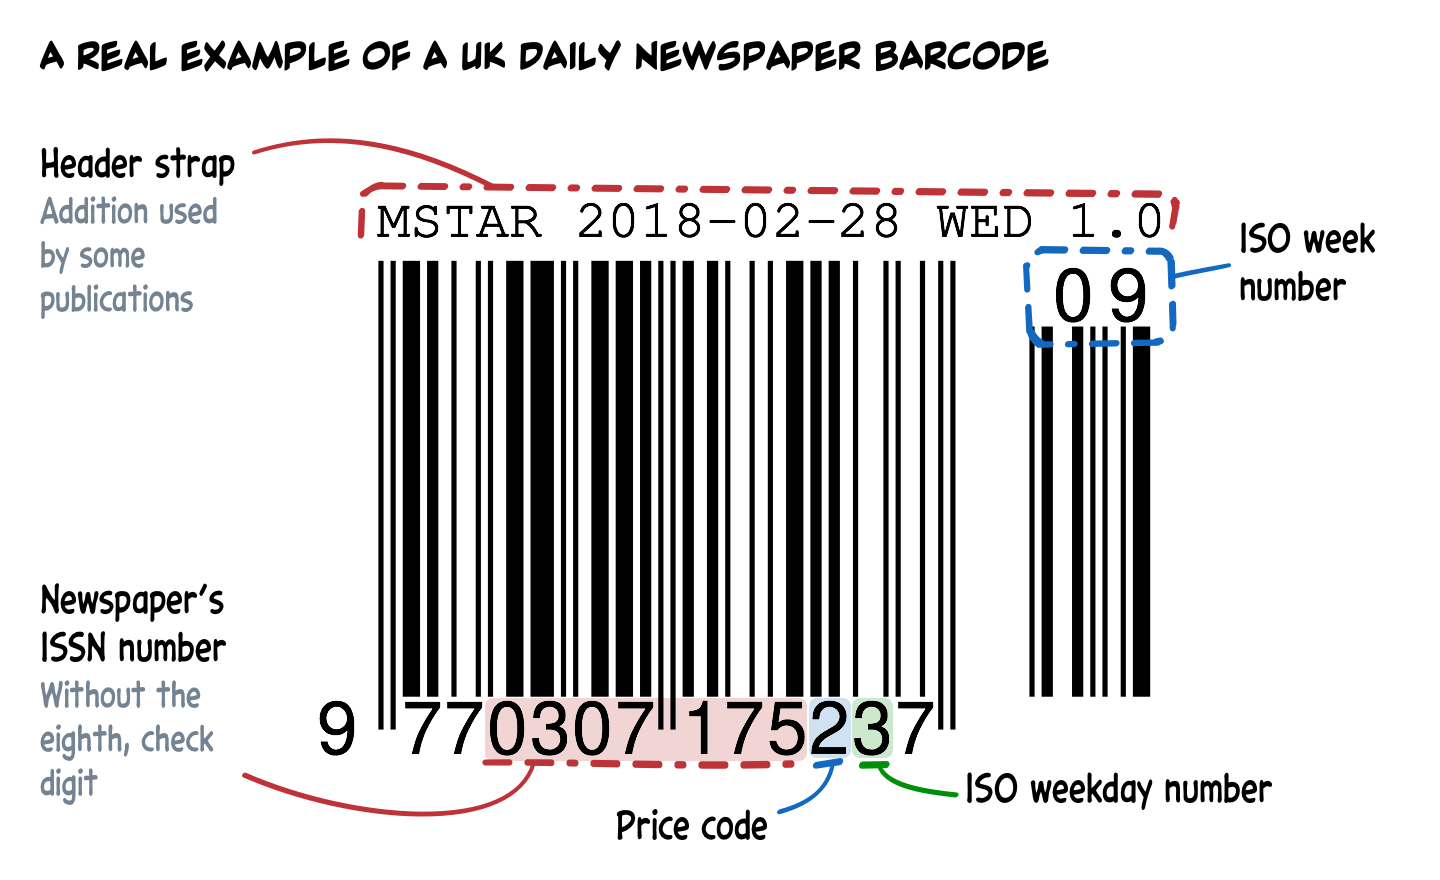 A diagram showing an annotated barcode as used by the Morning Star newspaper.